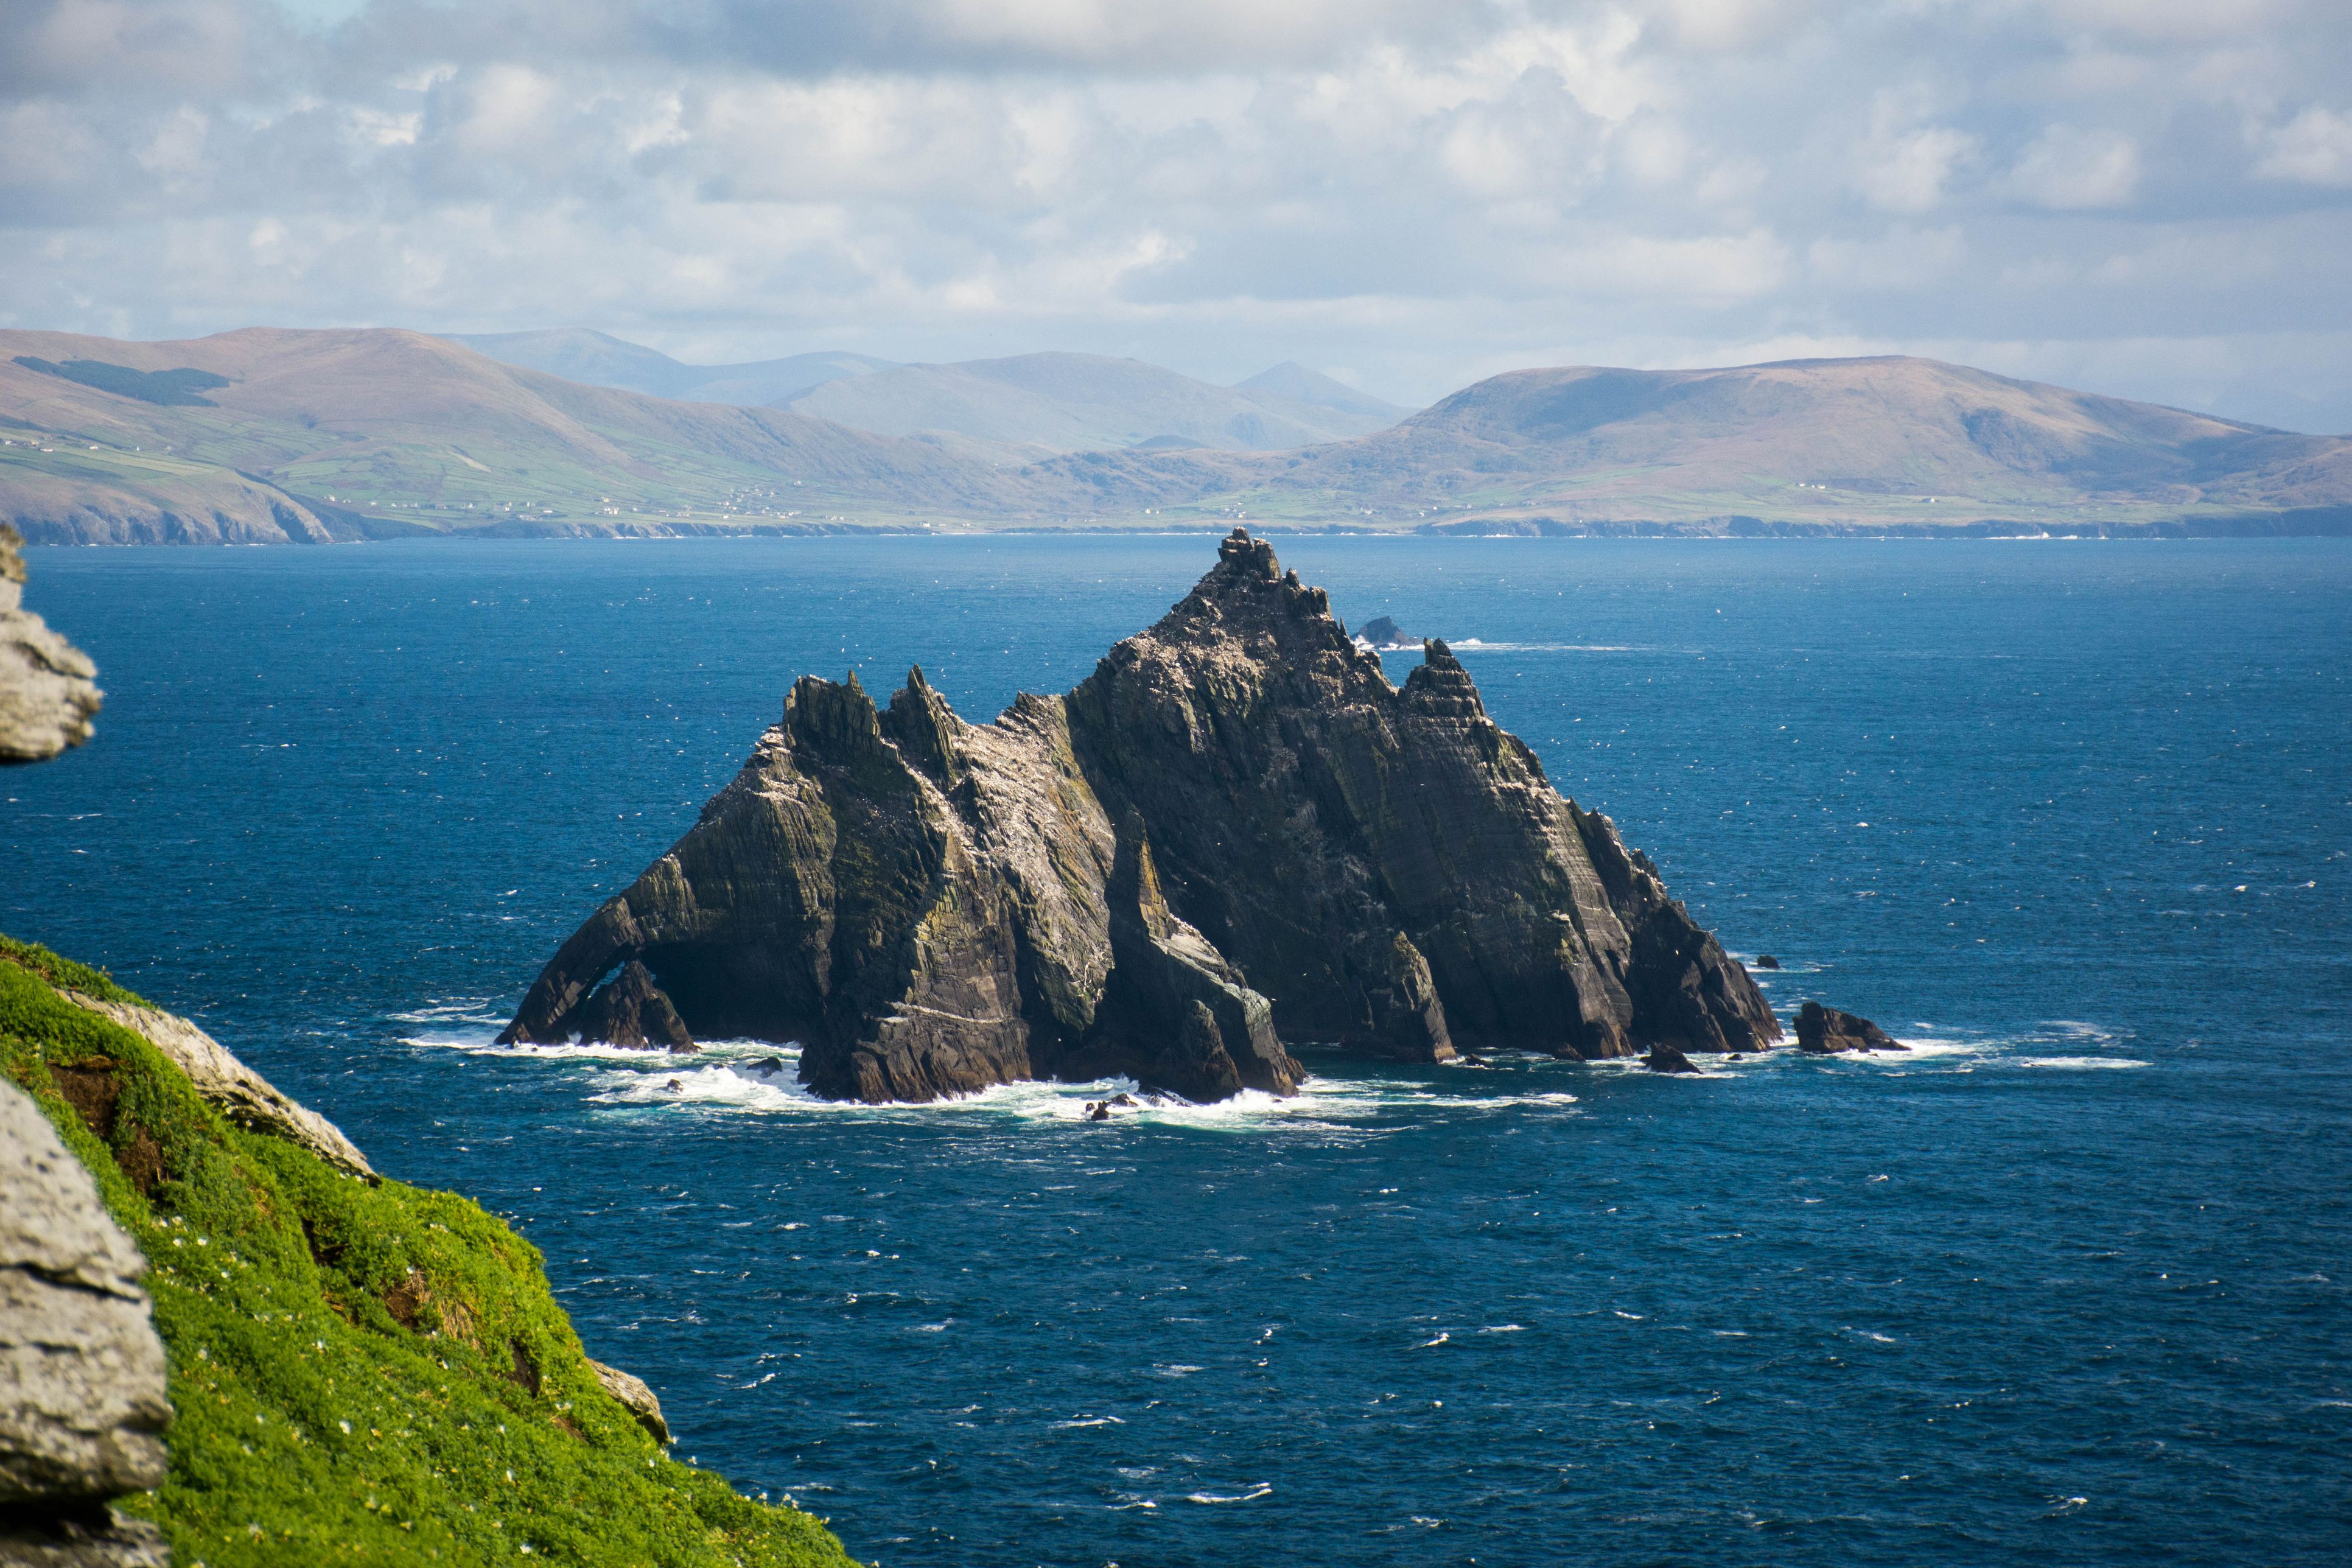 Skellig Michael Island off the coast of County Kerry featured as a key location in the Star Wars series. Getty Images